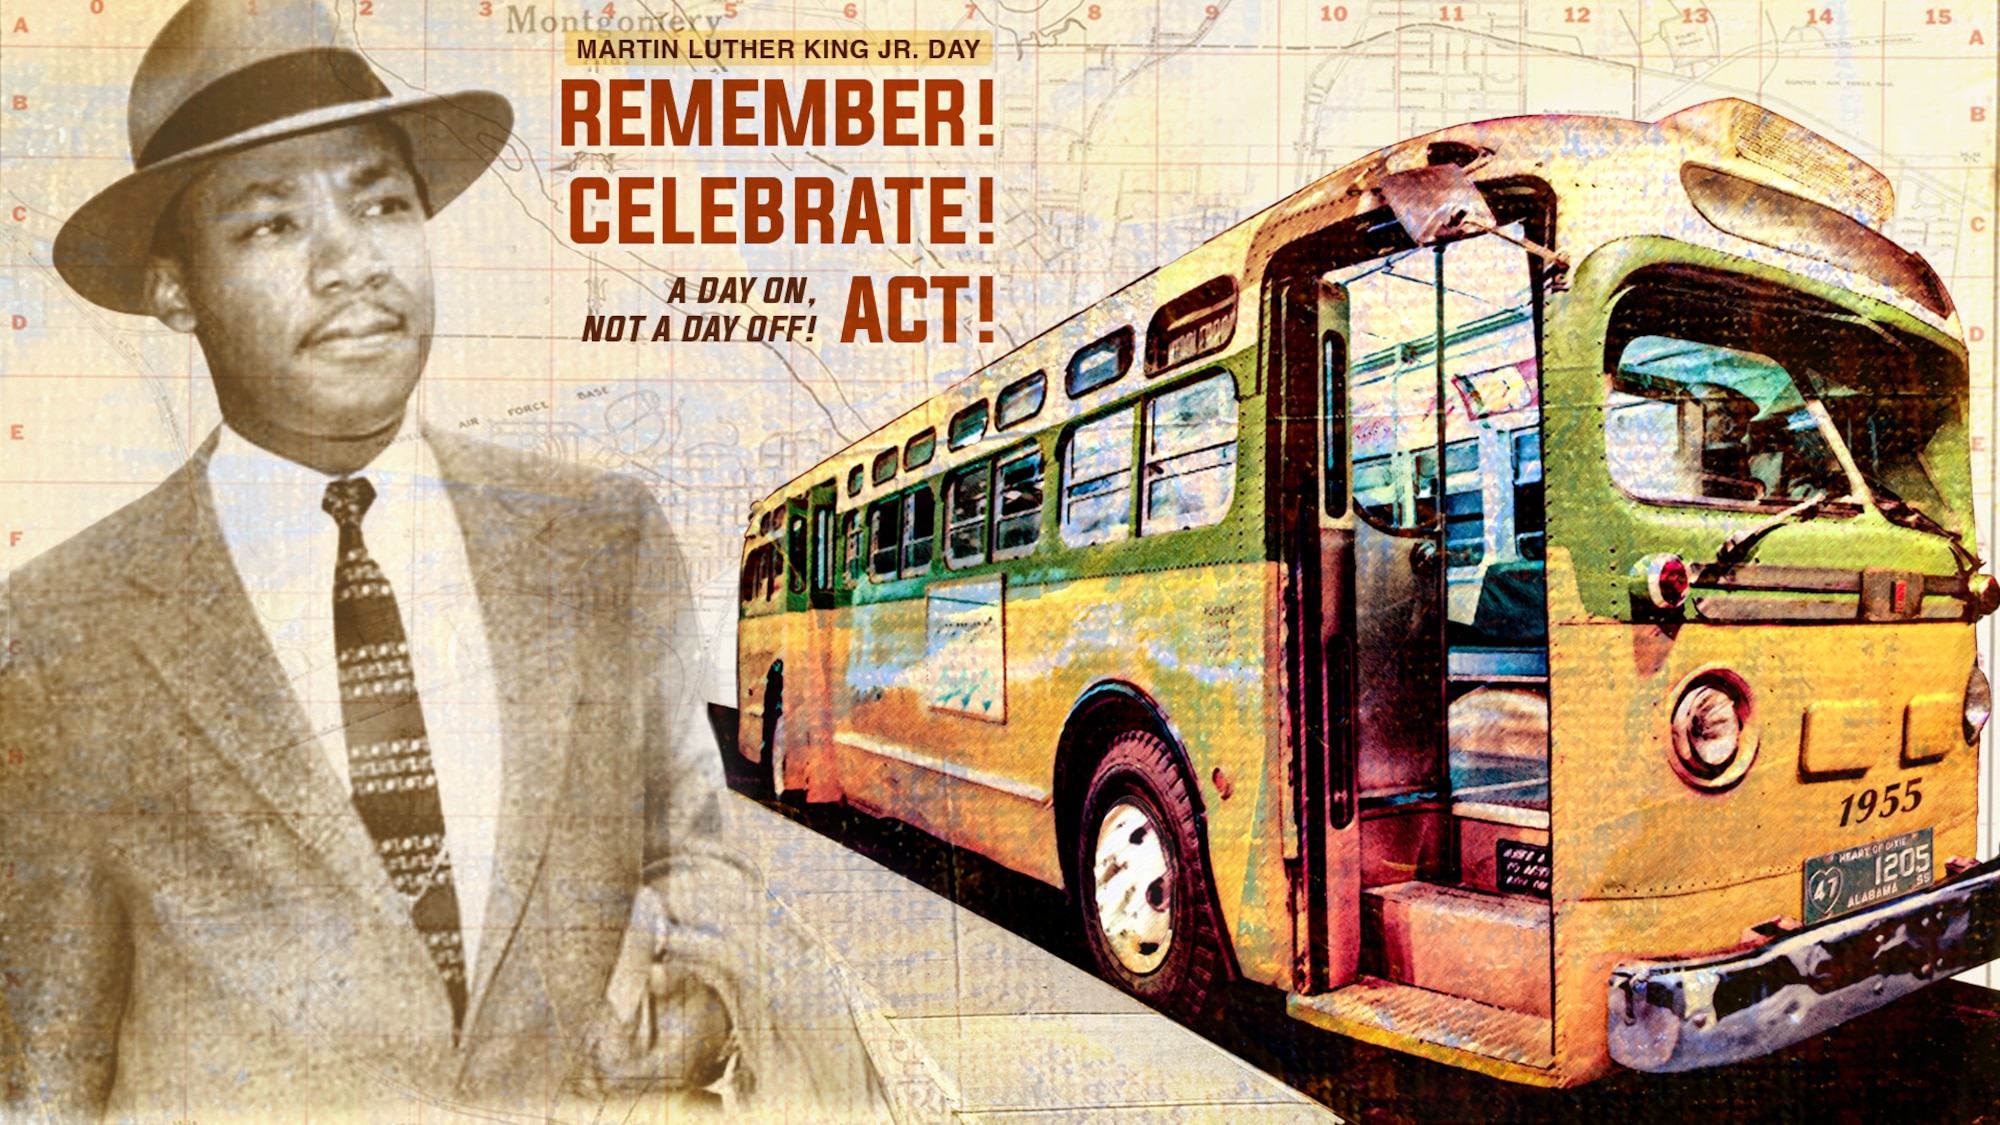 Dr. Martin Luther King Jr. Day is recognized annually and always presents the theme — “Remember! Celebrate! Act!- A Day On, Not A Day Off!” On Dec. 1, 1955 Rosa Parks, a Black seamstress, was arrested in Montgomery, Alabama, for refusing to give up her seat in the designated “white” section on a public transportation bus. Her arrest sparked the Montgomery Bus Boycott, during which the Black citizens of Montgomery refused to ride the city’s
buses in protest over the bus system’s policy of racial segregation. Martin Luther King, Jr., a Baptist
minister who endorsed nonviolent civil disobedience, emerged as leader of the Boycott. Successful resolution was achieved after 381 days when the Supreme Court ruled in Nov. 1956 that segregation on public buses was unconstitutional. The 2022 poster is a historical collection of imagery reflecting this critical moment in our nation’s past. (DOD graphic by the Defense Equal Opportunity Management Institute)